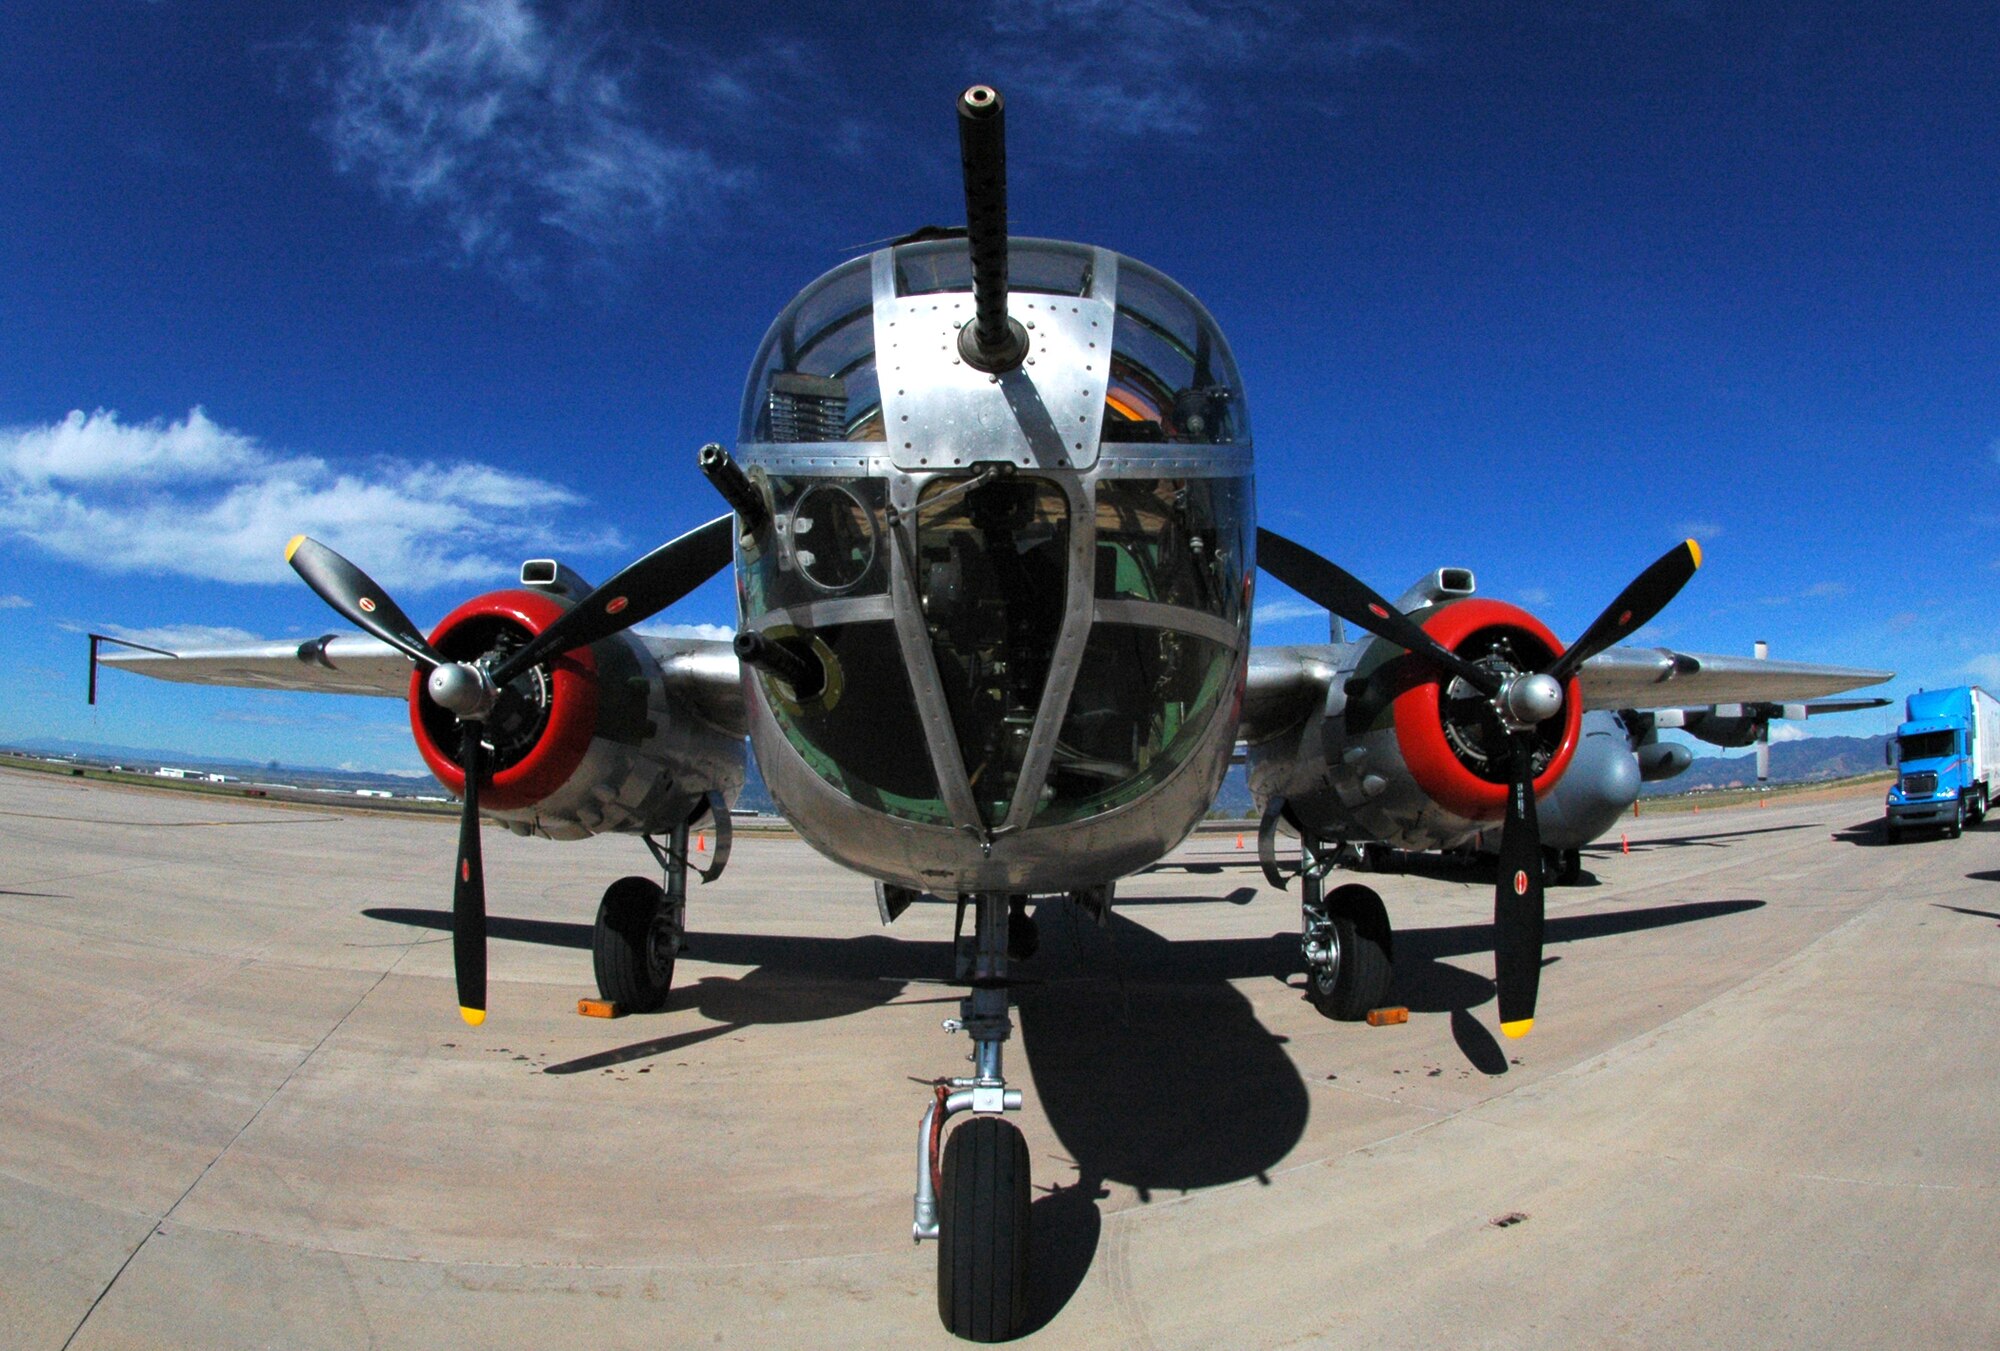 A World War II-era B-25 Mitchell medium bomber stands ready more than 60 years later for a static display aircraft mission May 19 at Peterson Air Force Base, Colo. The bomber was parked next to a 302nd Airlift Wing C-130 Hercules (right) and was joined by a P-47 Thunderbolt, an F-15C Eagle, a Colorado Air National Guard F-16 Fighting Falcon and a Canadian CF-18 Hornet as part of a change of command ceremony for the North American Aerospace Defense Command and U.S. Northern Command organizations. The 302nd Airlift Wing is an Air Force Reserve Command-assigned unit. (U.S. Air Force photo/Staff Sgt. Stephen J. Collier)